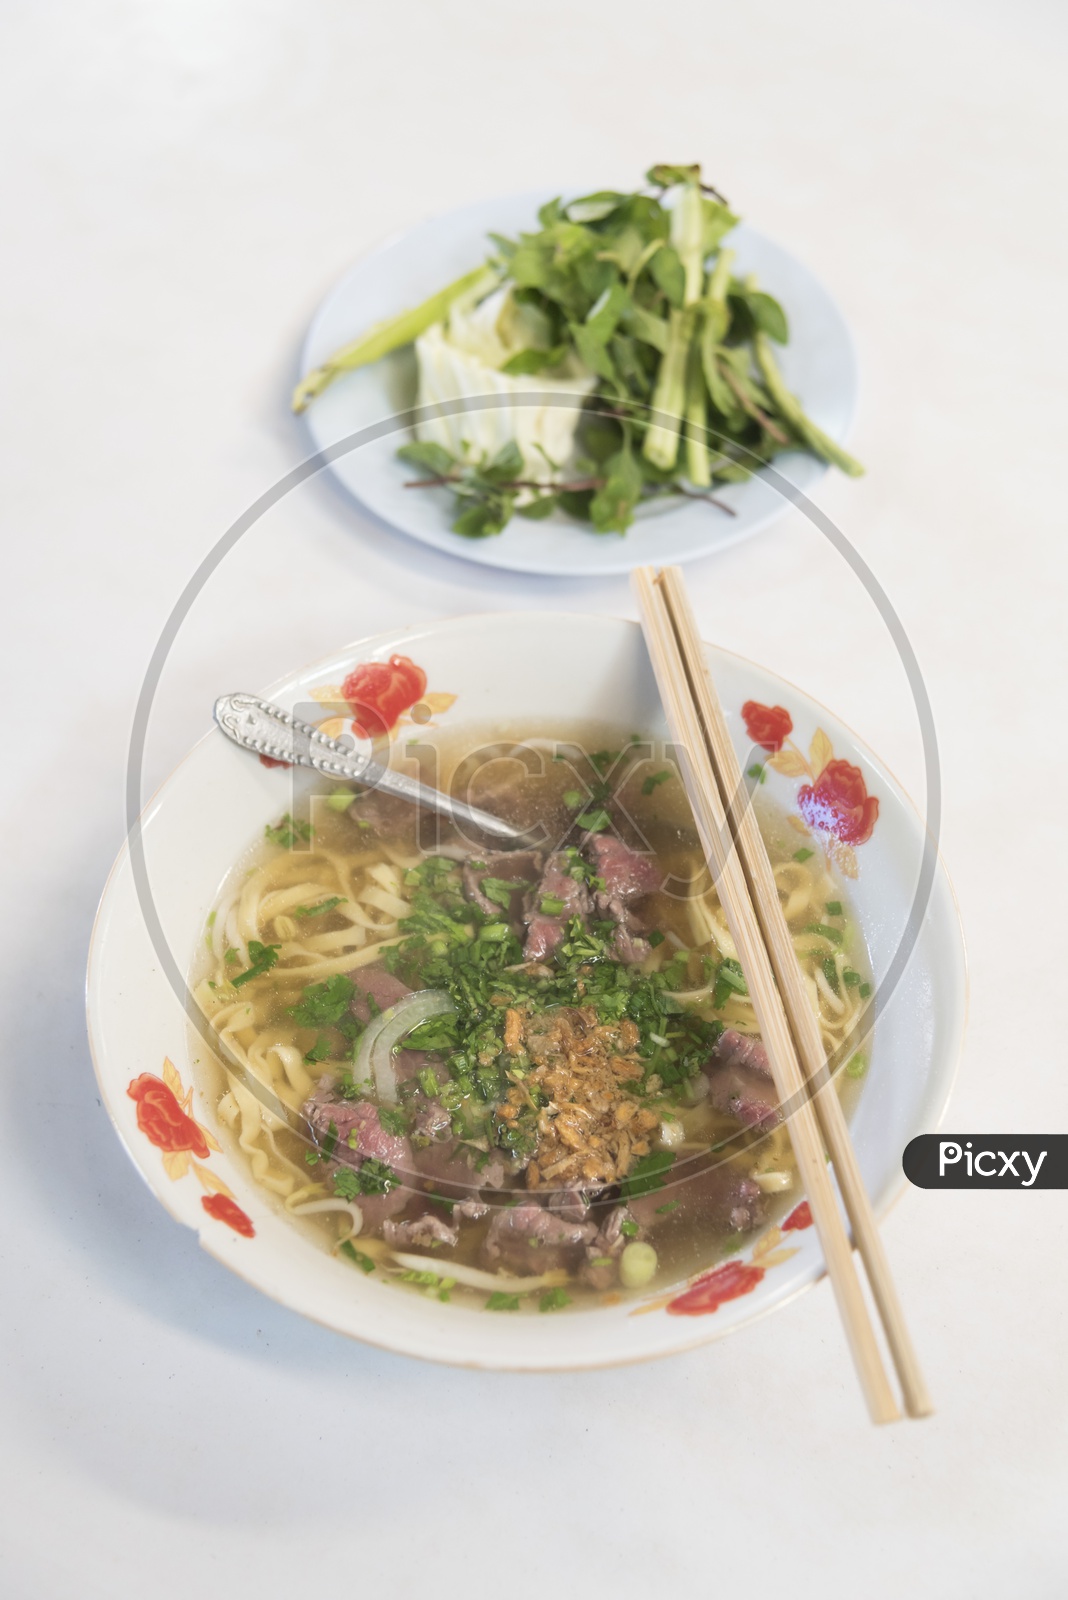 Pho Bo - Vietnamese fresh rice noodle soup served in a bowl